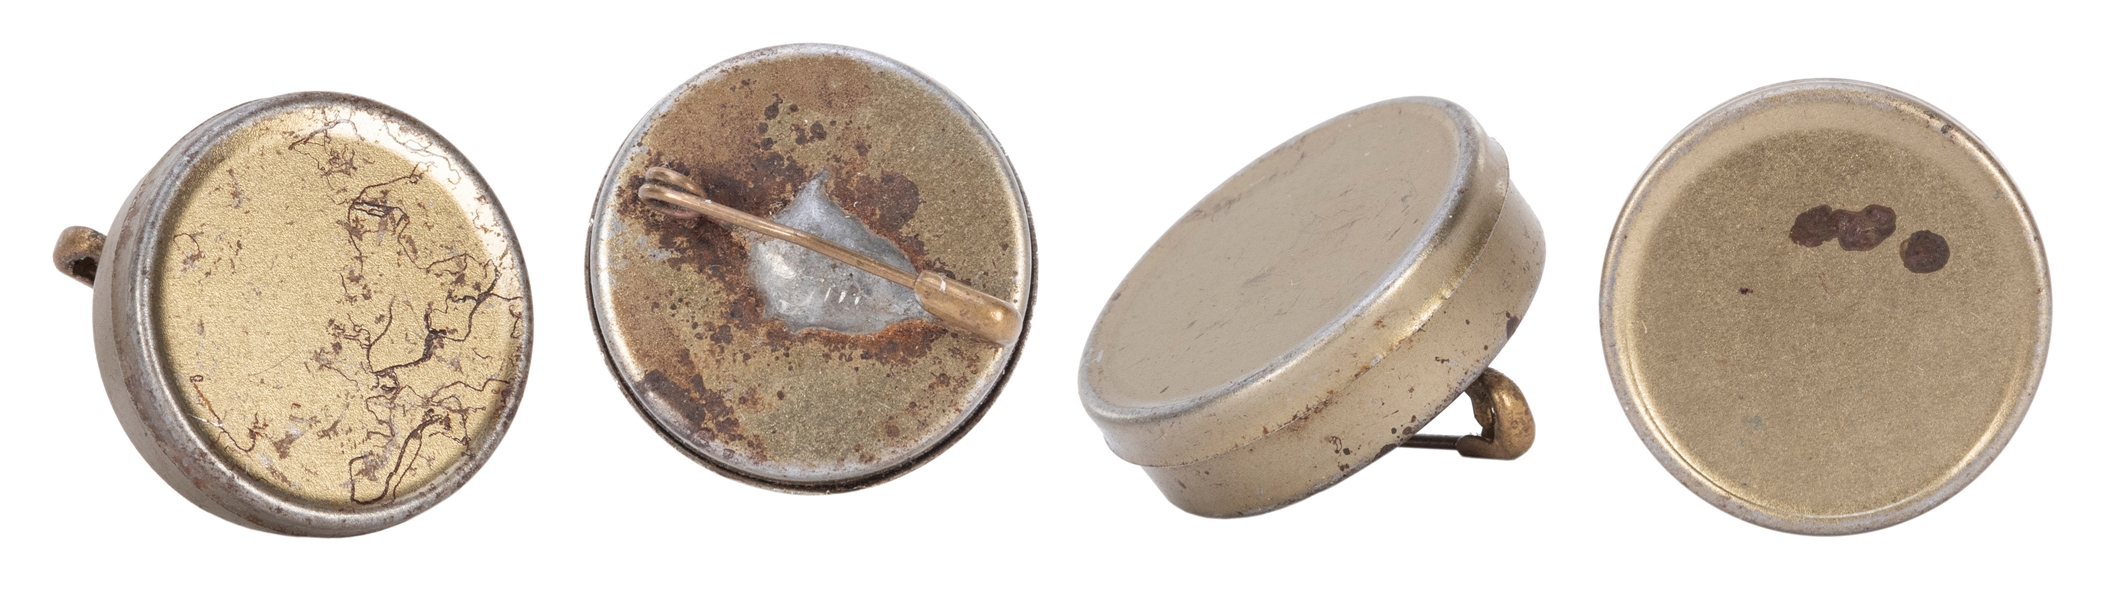  Card Cheating Daub Canisters with Safety Pins. Early 20th c...